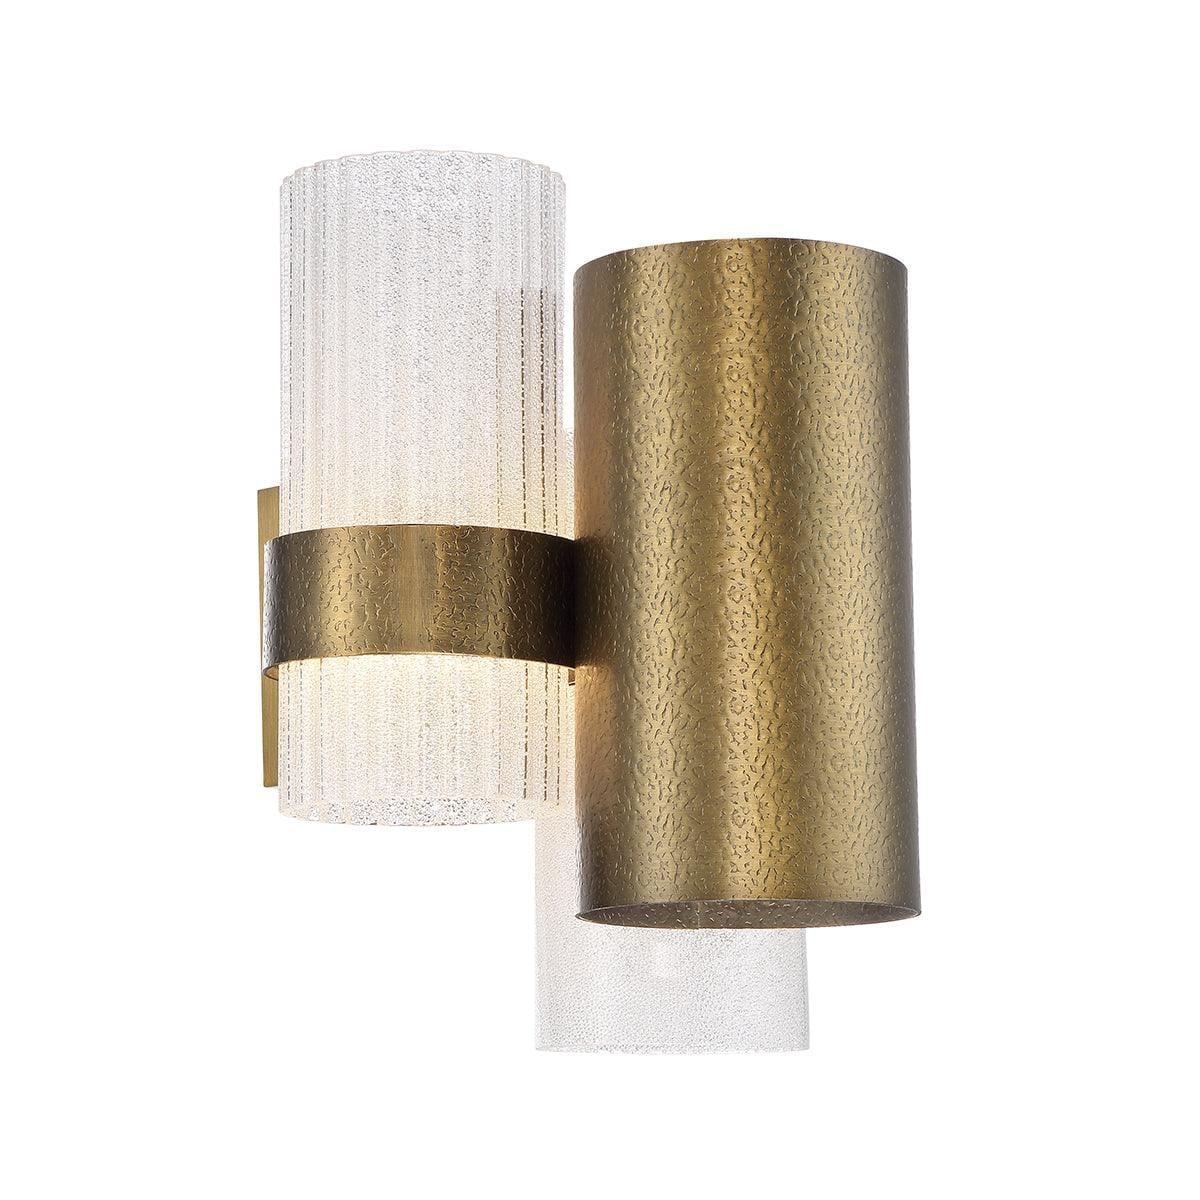 Modern Forms - Harmony LED Wall Sconce - WS-71014-AB | Montreal Lighting & Hardware